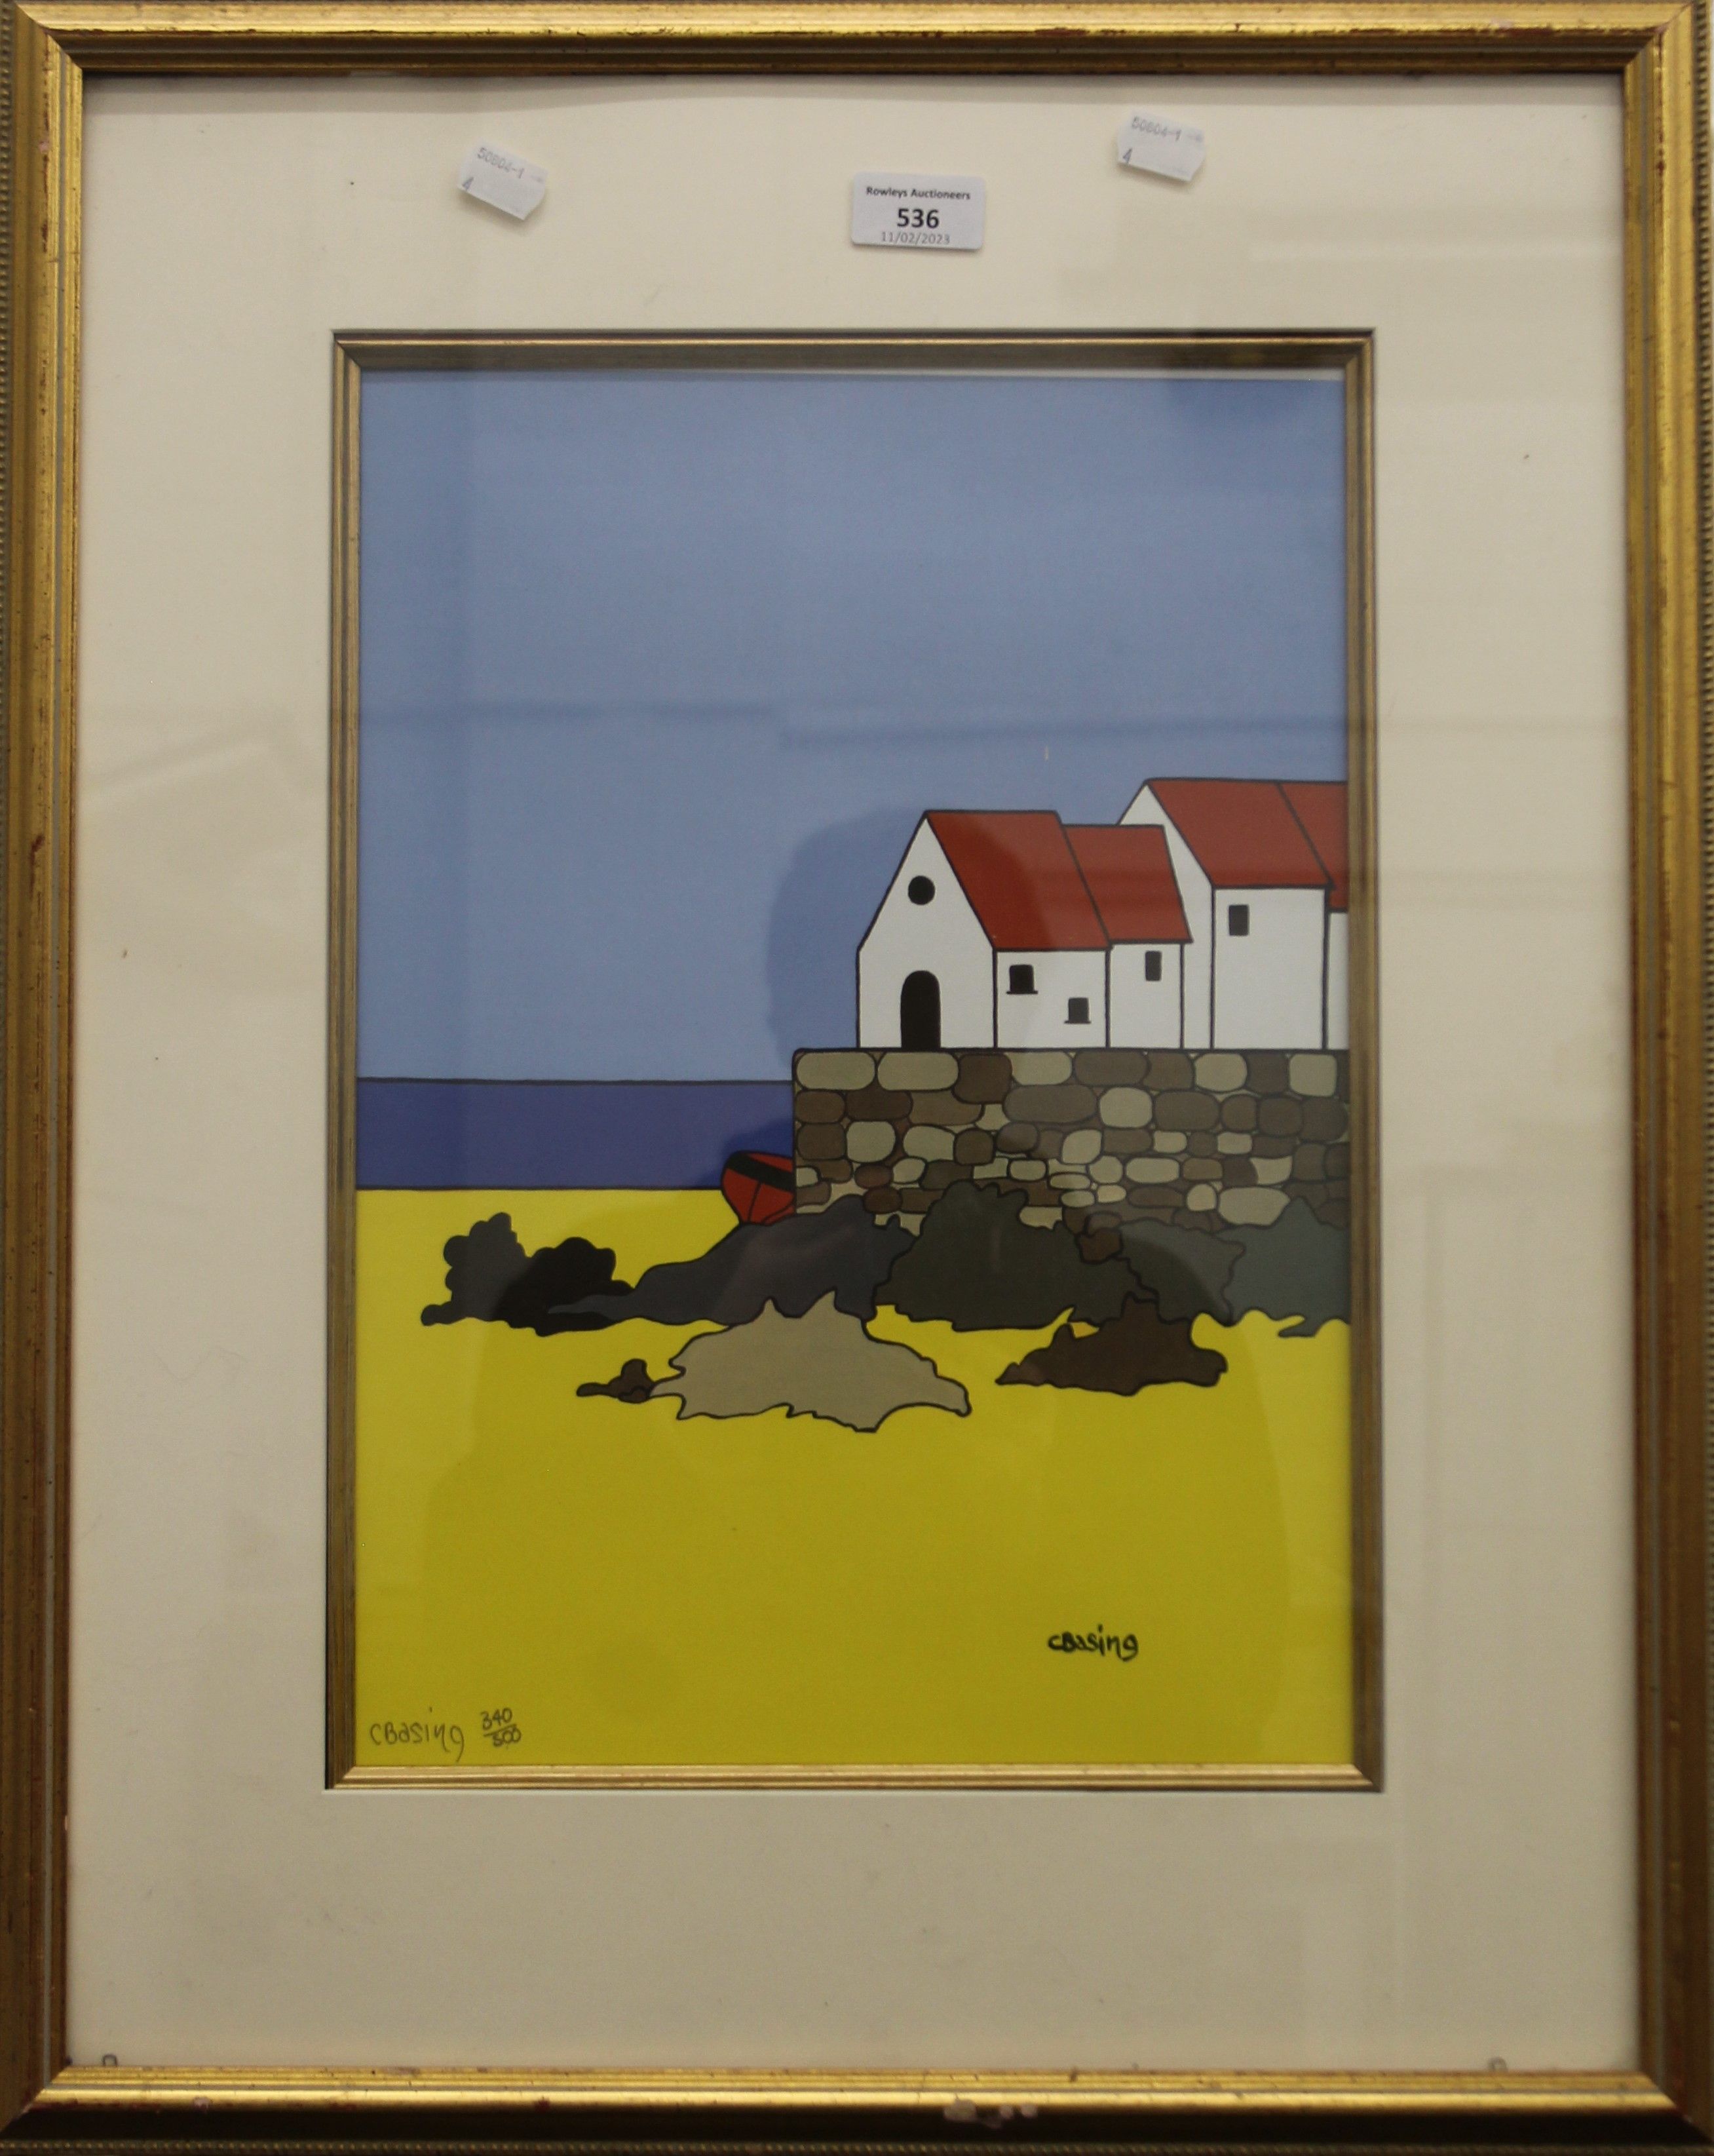 C BASING, Beach Scene, limited edition print, numbered 340/500, framed and glazed. 28.5 x 40 cm. - Image 2 of 3